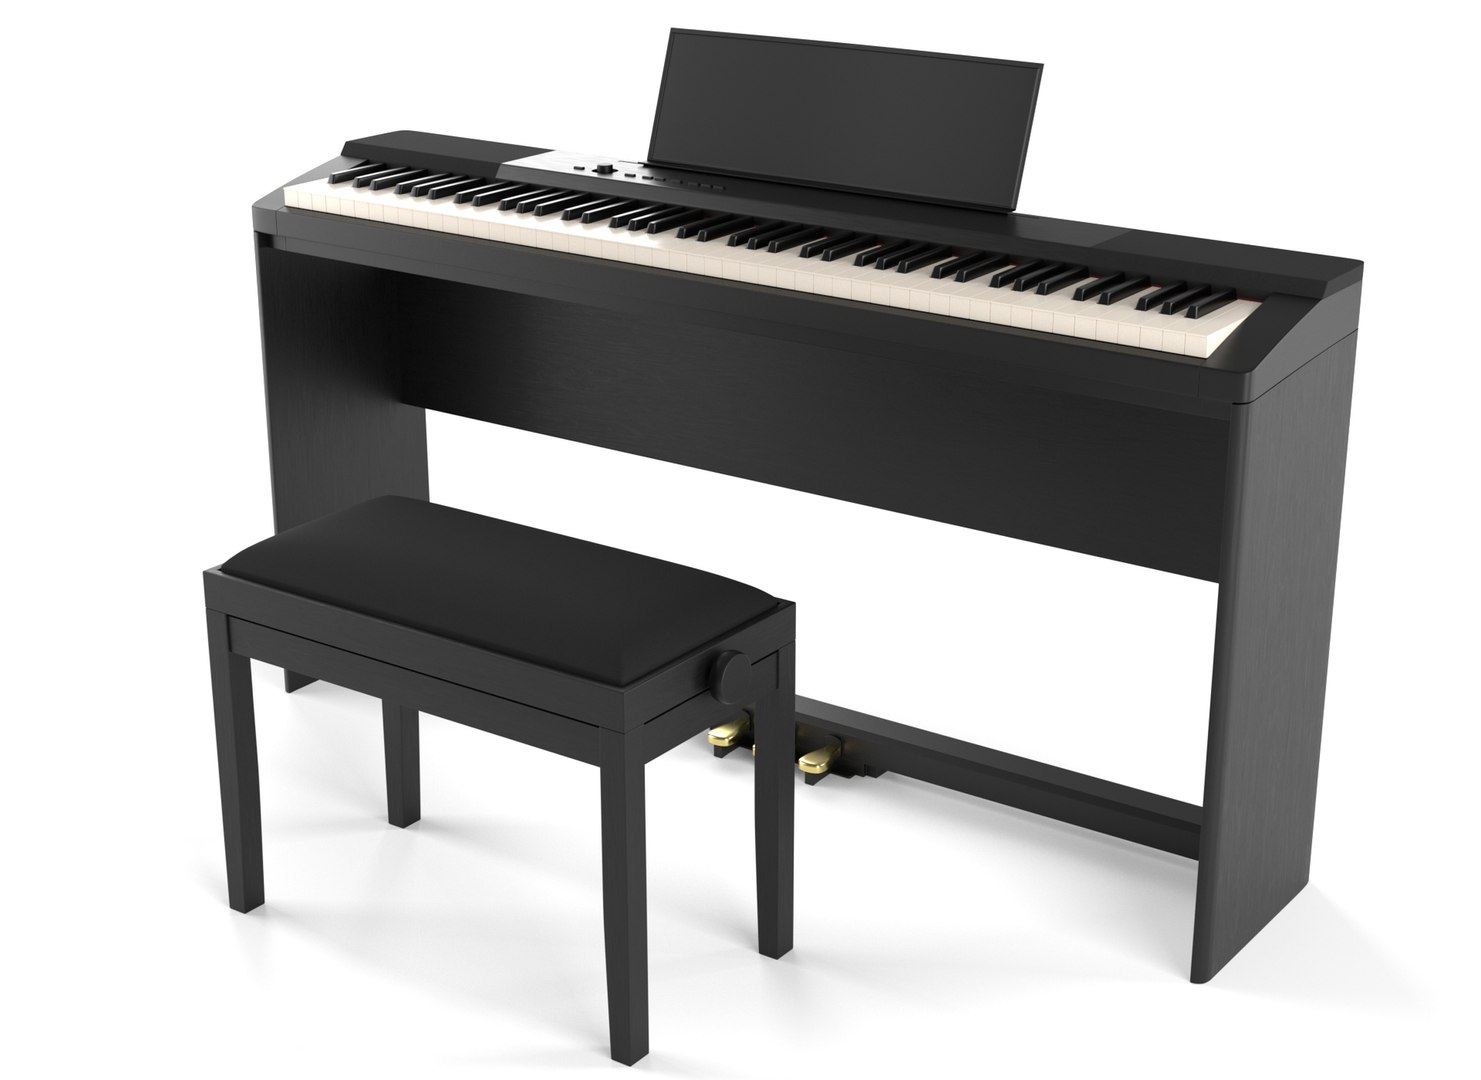 Learn piano online by yourself. Use a tablet or computer to learn piano  tutorials online. The black grand piano has a tablet placed on a notebook  stand. 3D Rendering. 6666658 Stock Photo